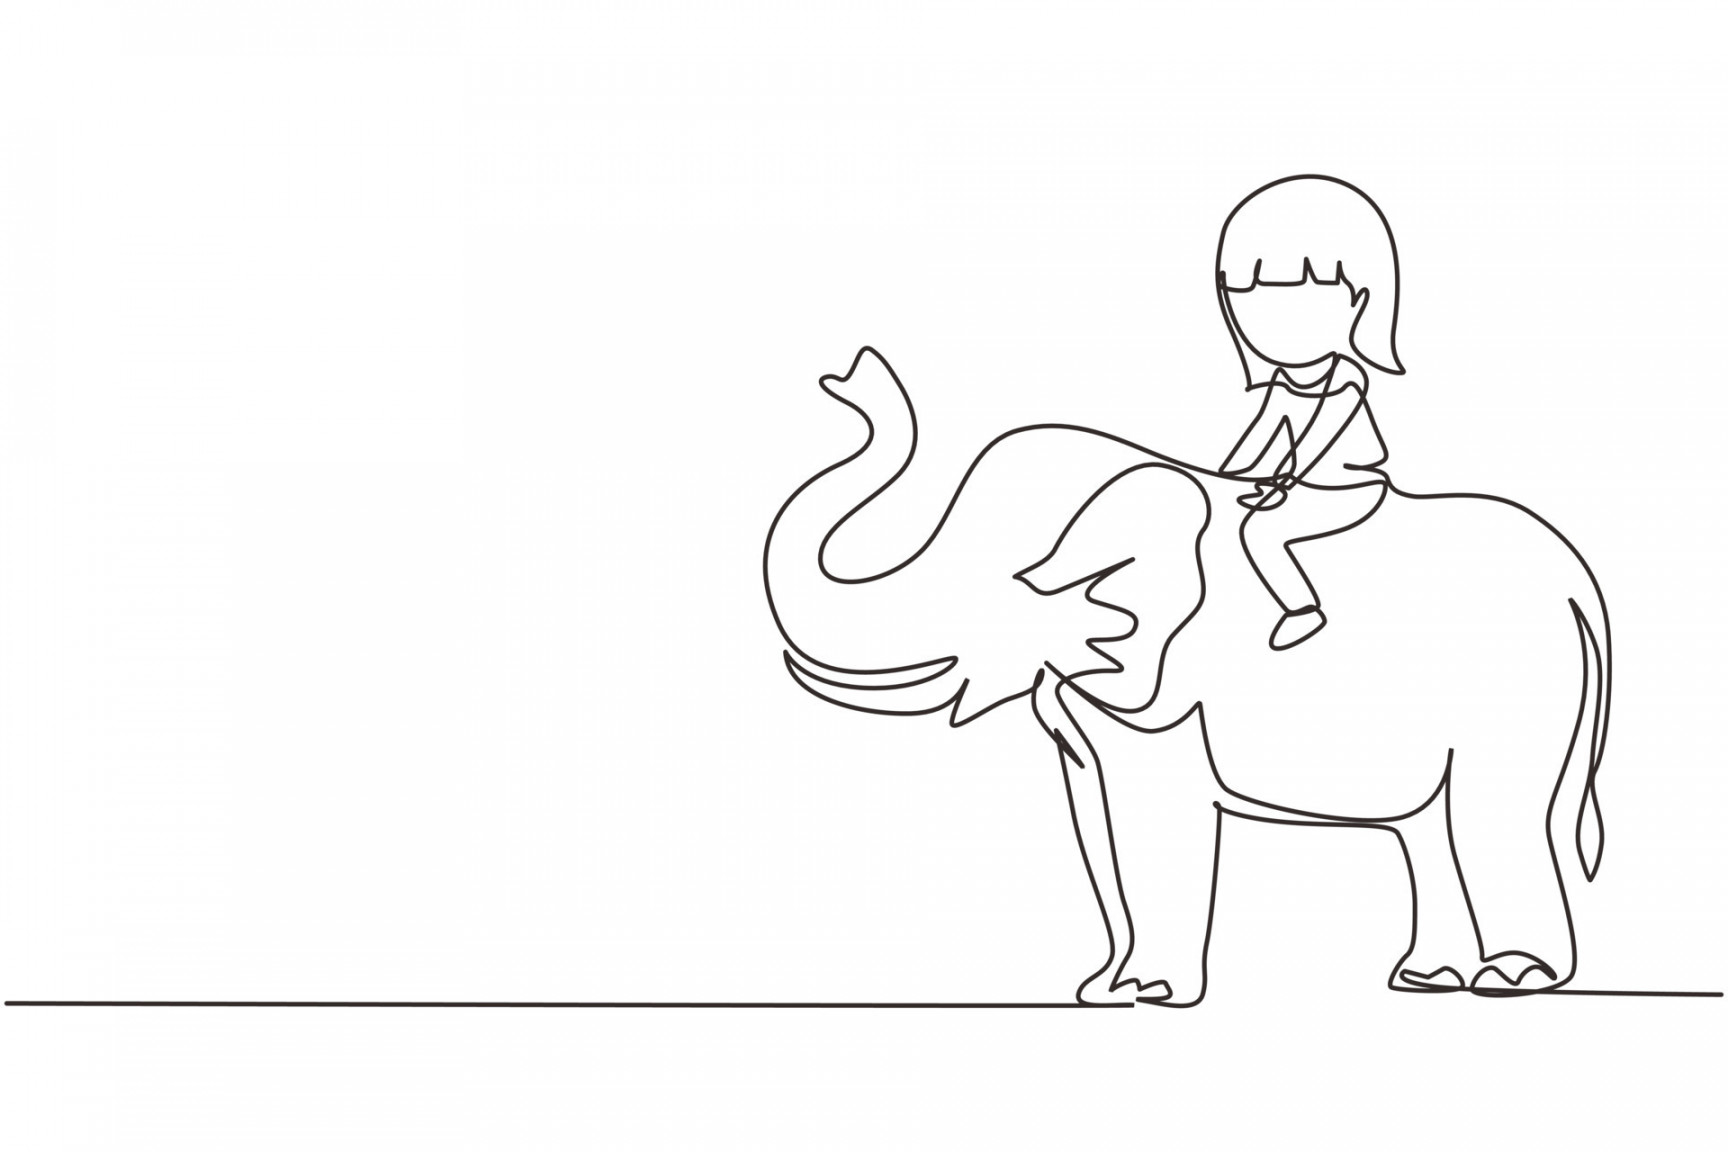 Single one line drawing happy little girl riding elephant